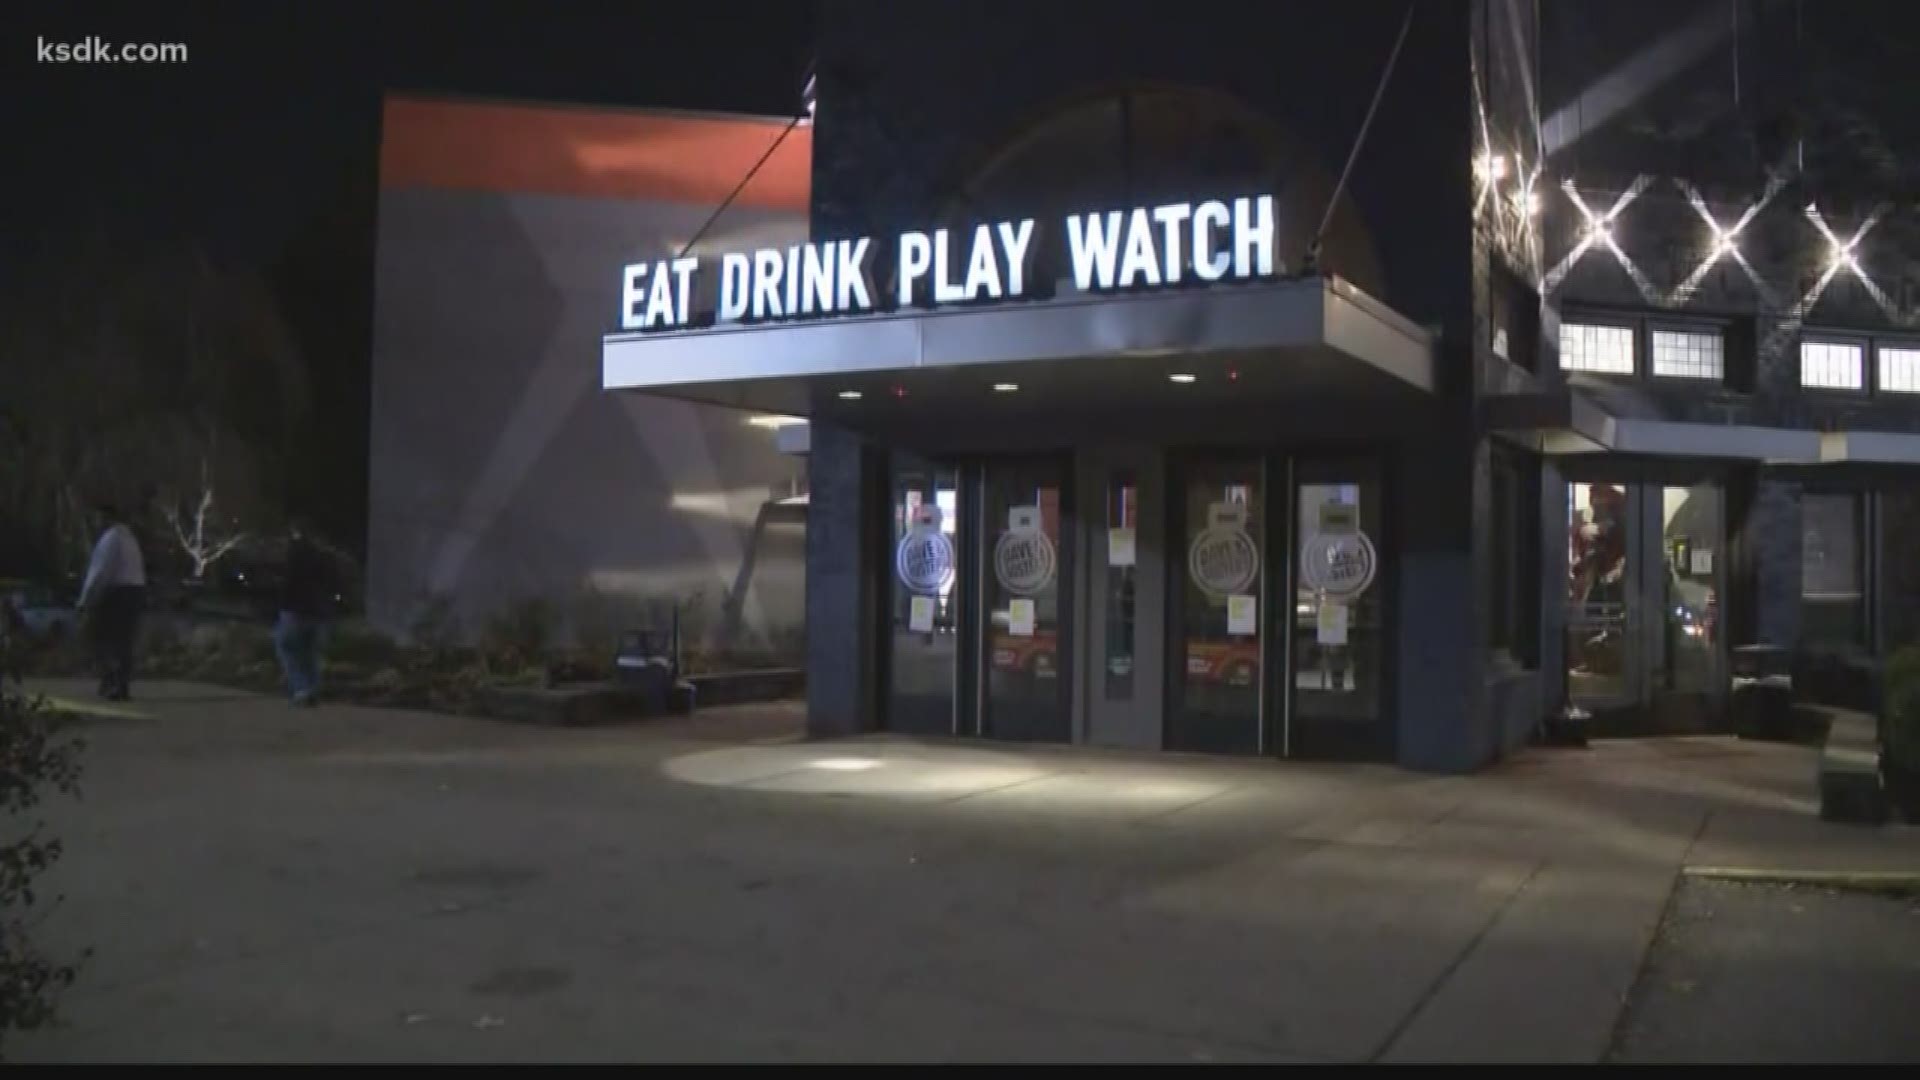 An employee with Dave & Buster's confirmed that there was a fight inside the business at around 8:45 p.m. and the entire building was evacuated